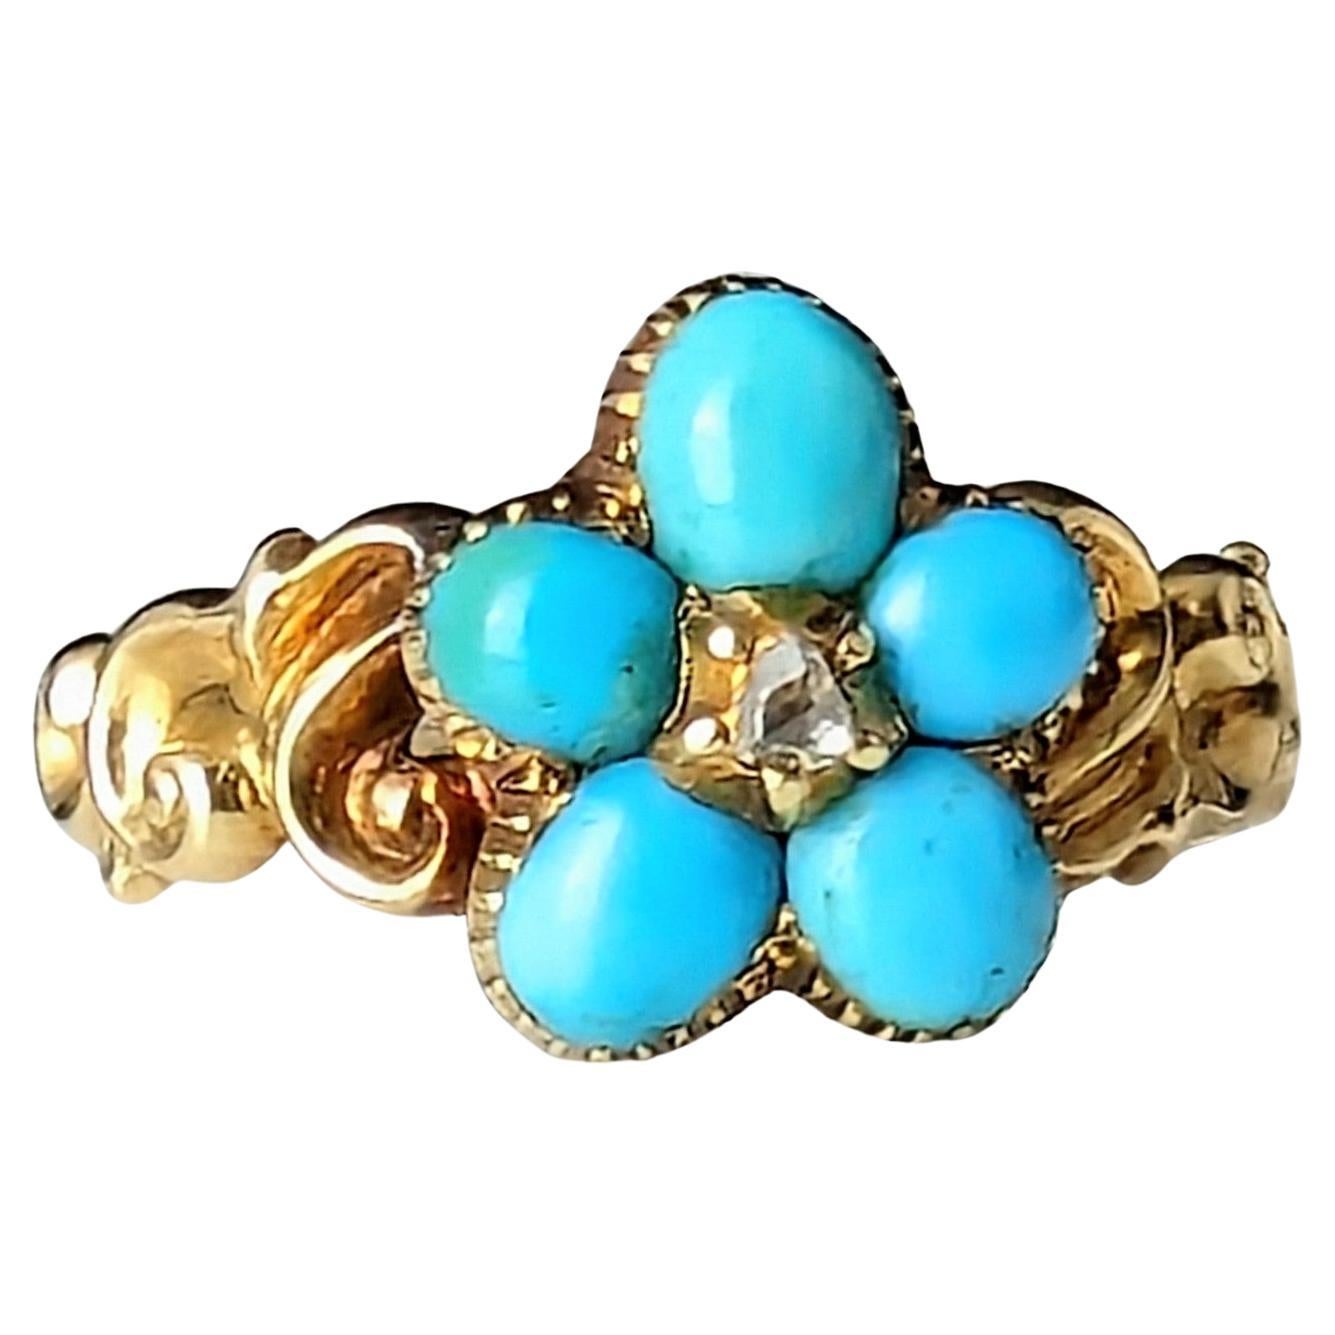 Antique Regency Turquoise and Diamond forget me not ring, 15k gold 